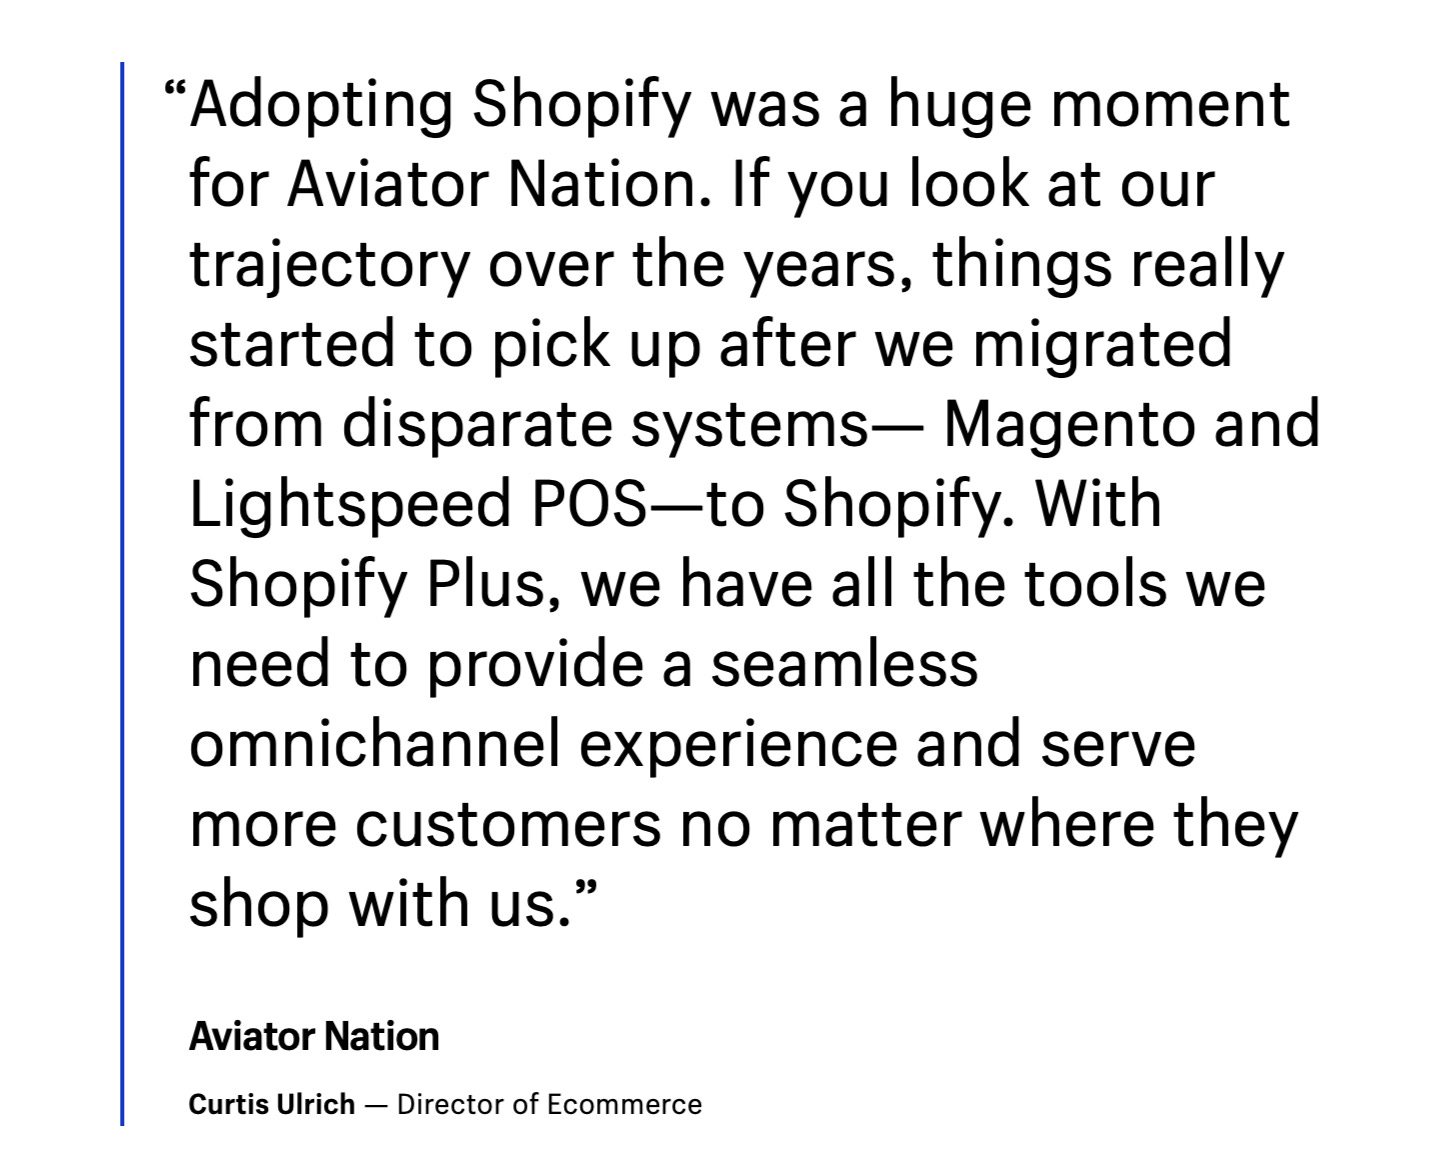 Testimonial about Shopify Plus from Curtis Ulrich, Director of Ecommerce at Aviator Nation